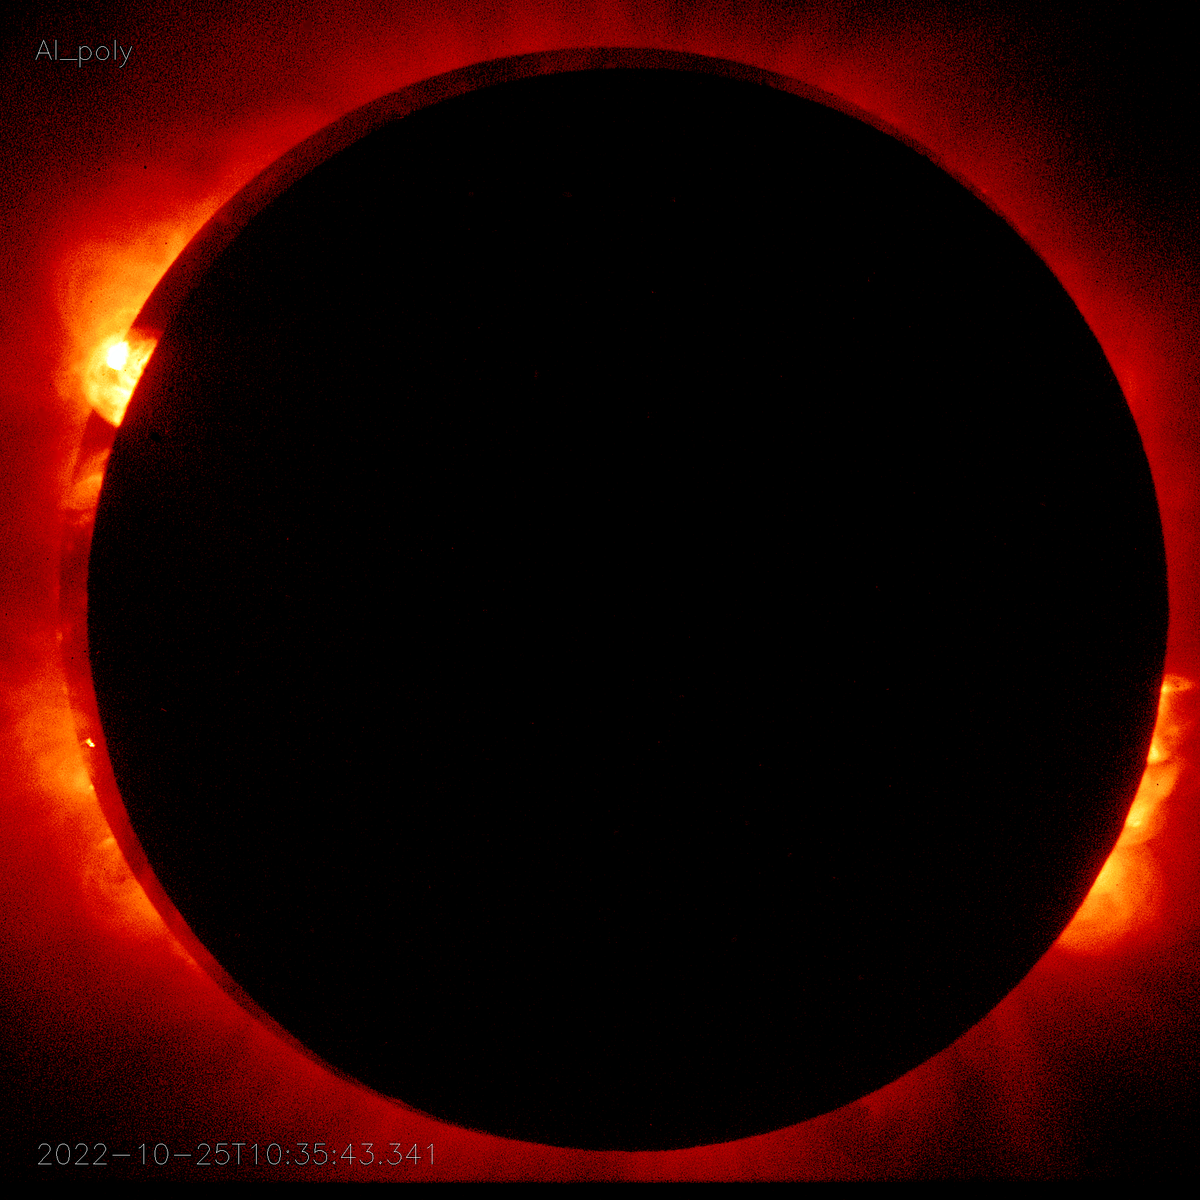 Sun-watching Hinode spacecraft captures solar eclipse with X-ray vision